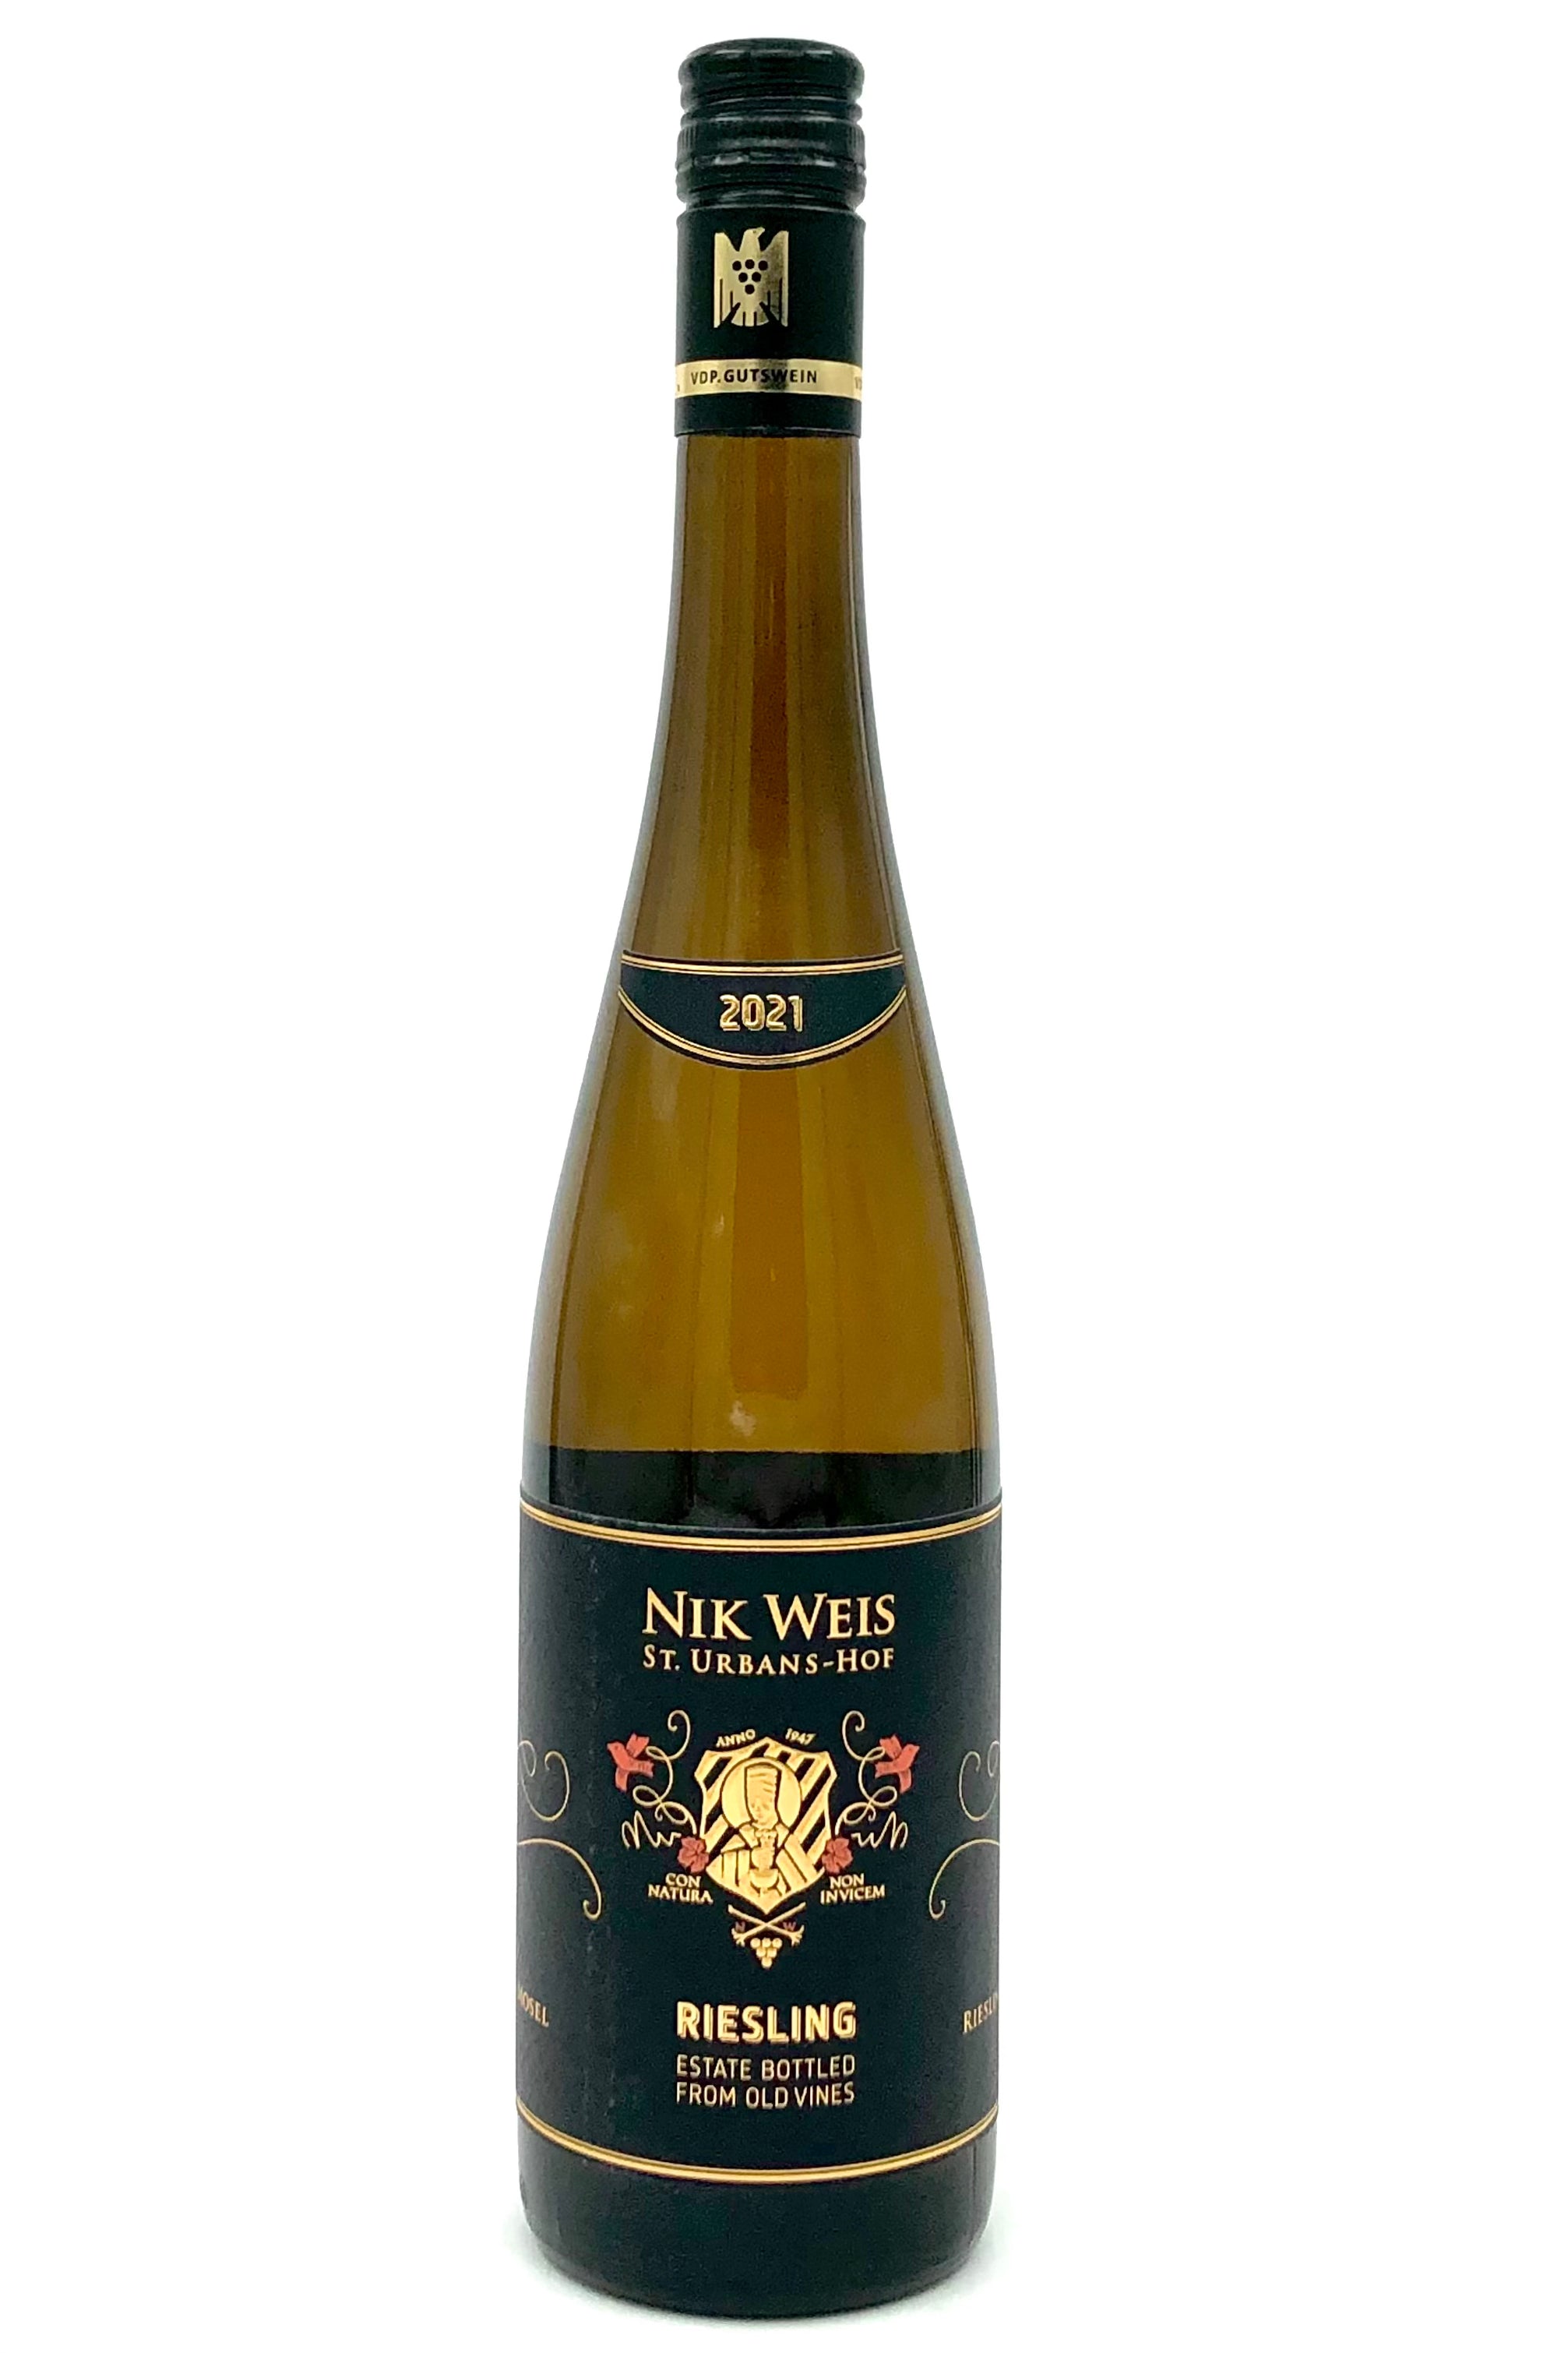 Nik Weis 2021 Riesling Qualitätswein Mosel From Old Vin - Wines